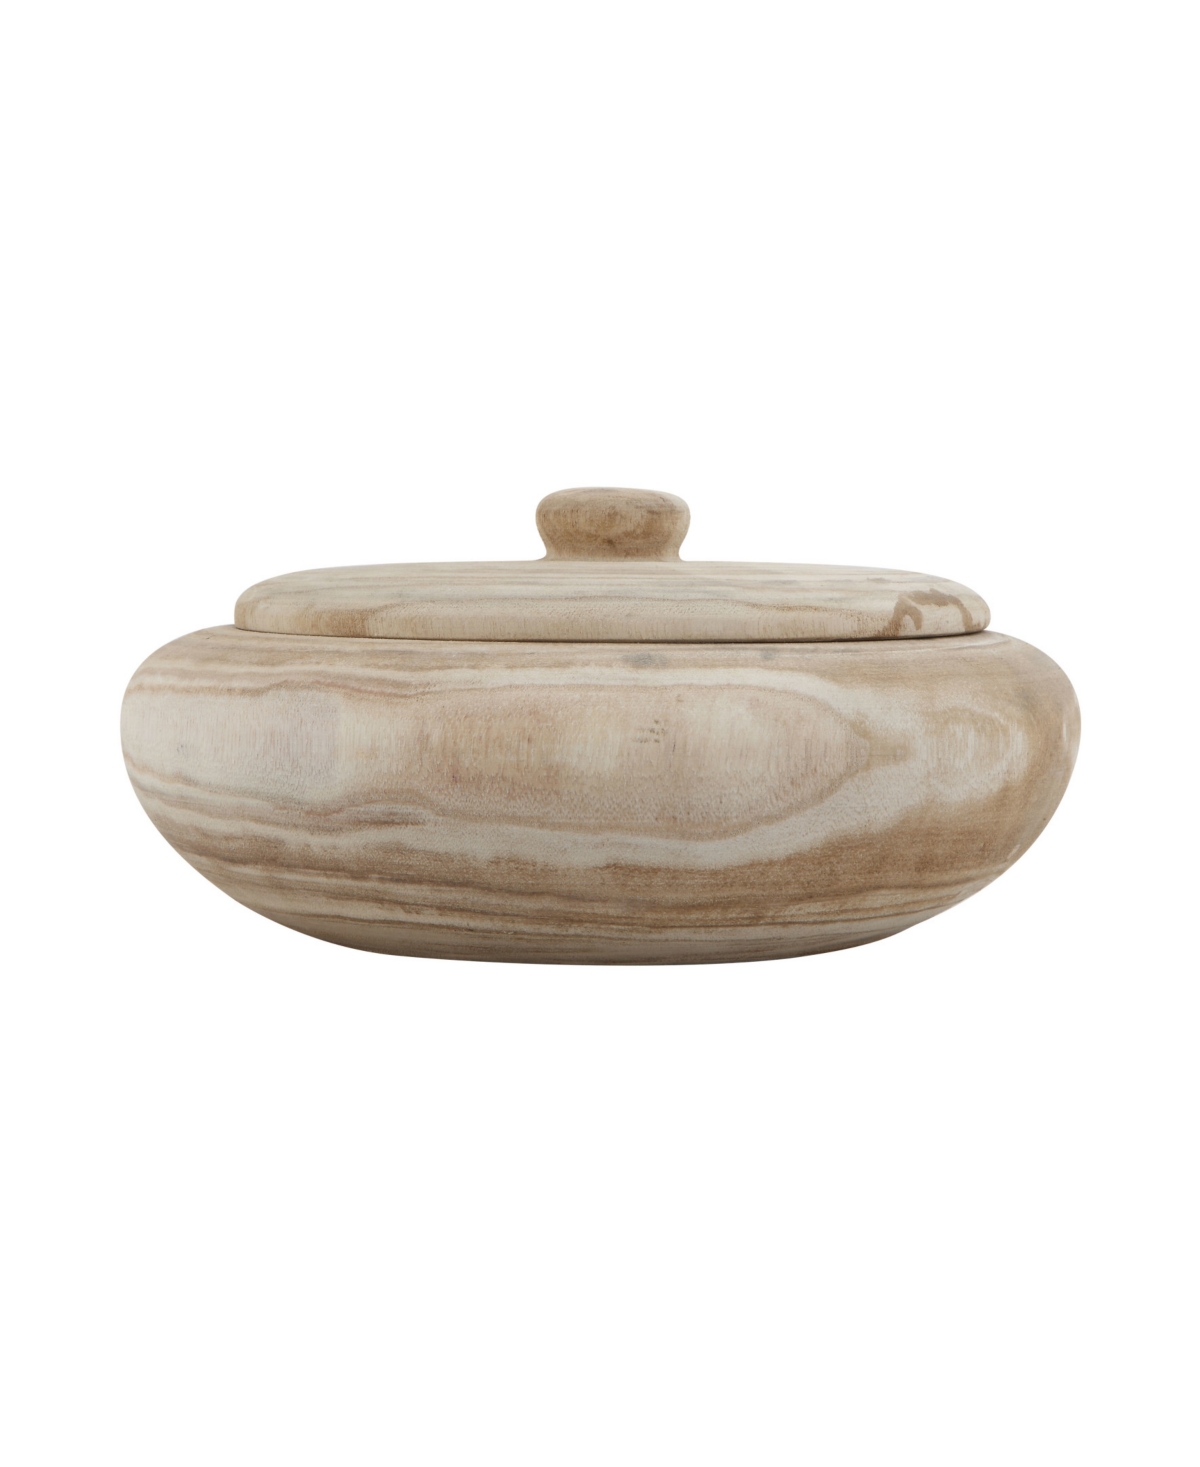 Decorative Natural Paulownia Wood Container with Lid - Brown